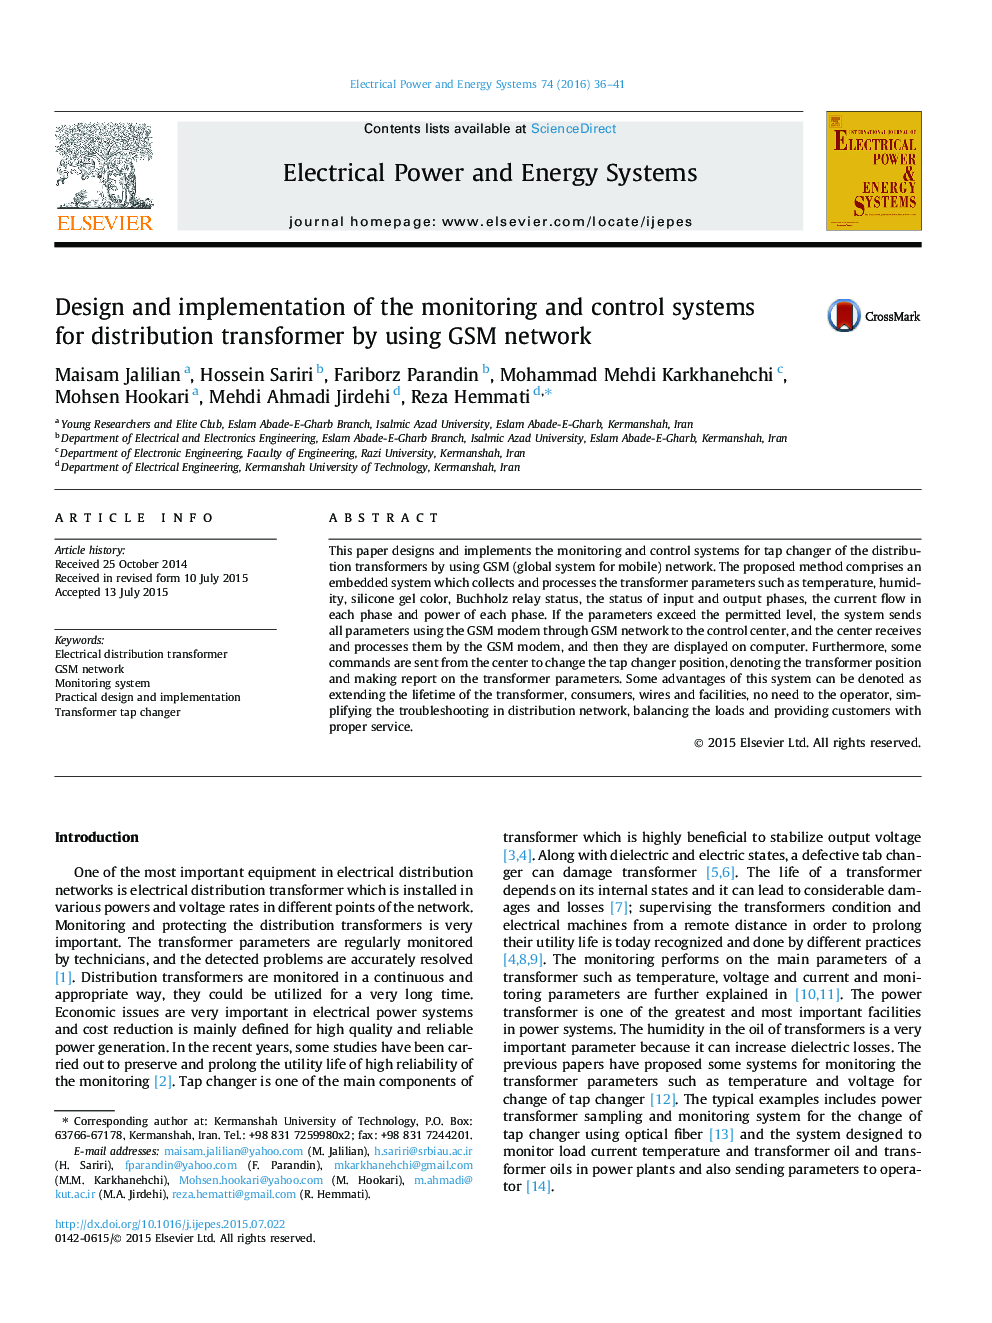 Design and implementation of the monitoring and control systems for distribution transformer by using GSM network